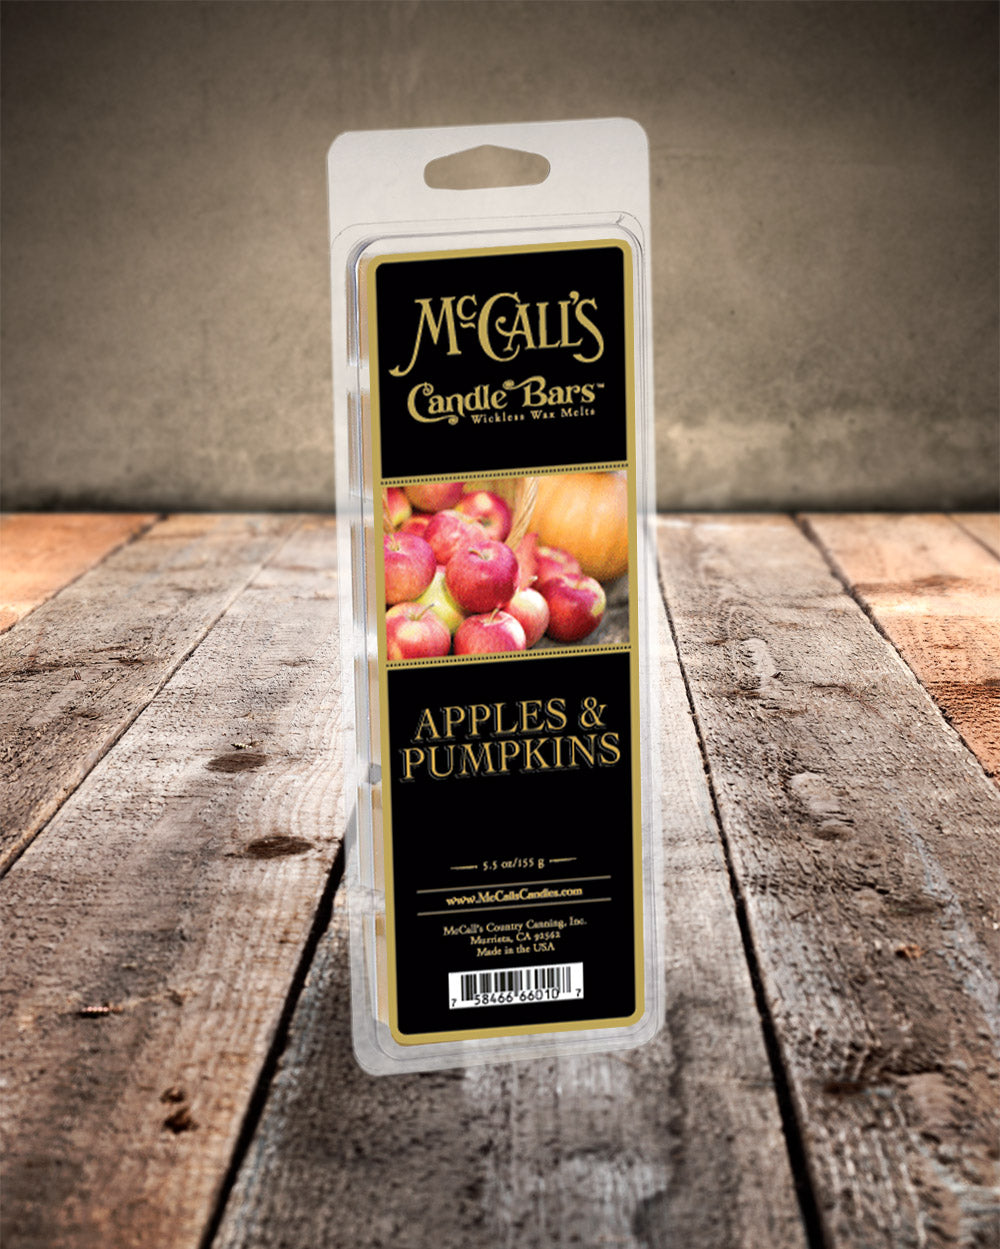 APPLES and PUMPKINS Candle Bars-5.5 oz Pack